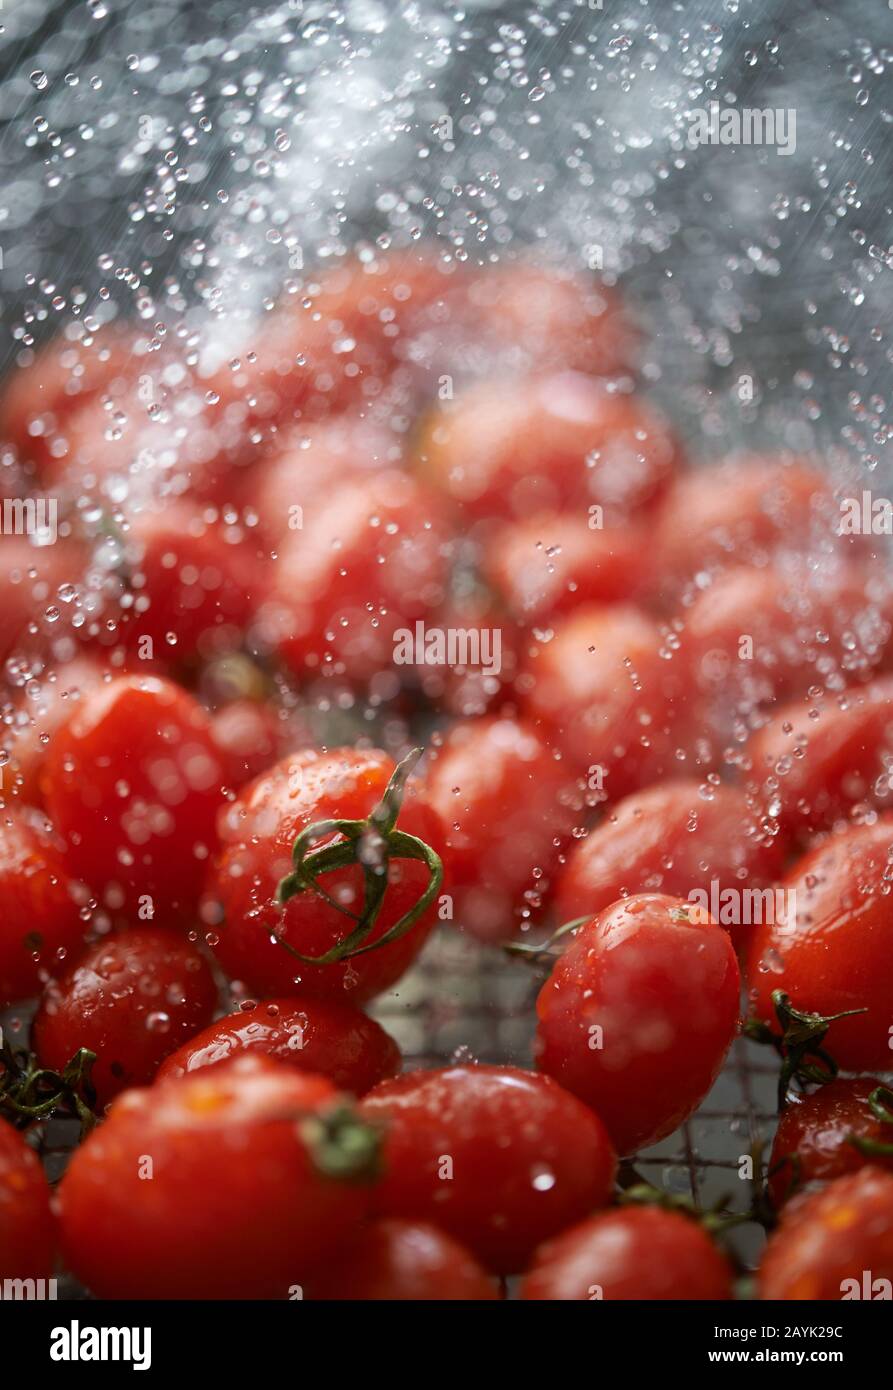 Cleaning the vivid red ripe tomatoes in the metal wire basket Stock Photo